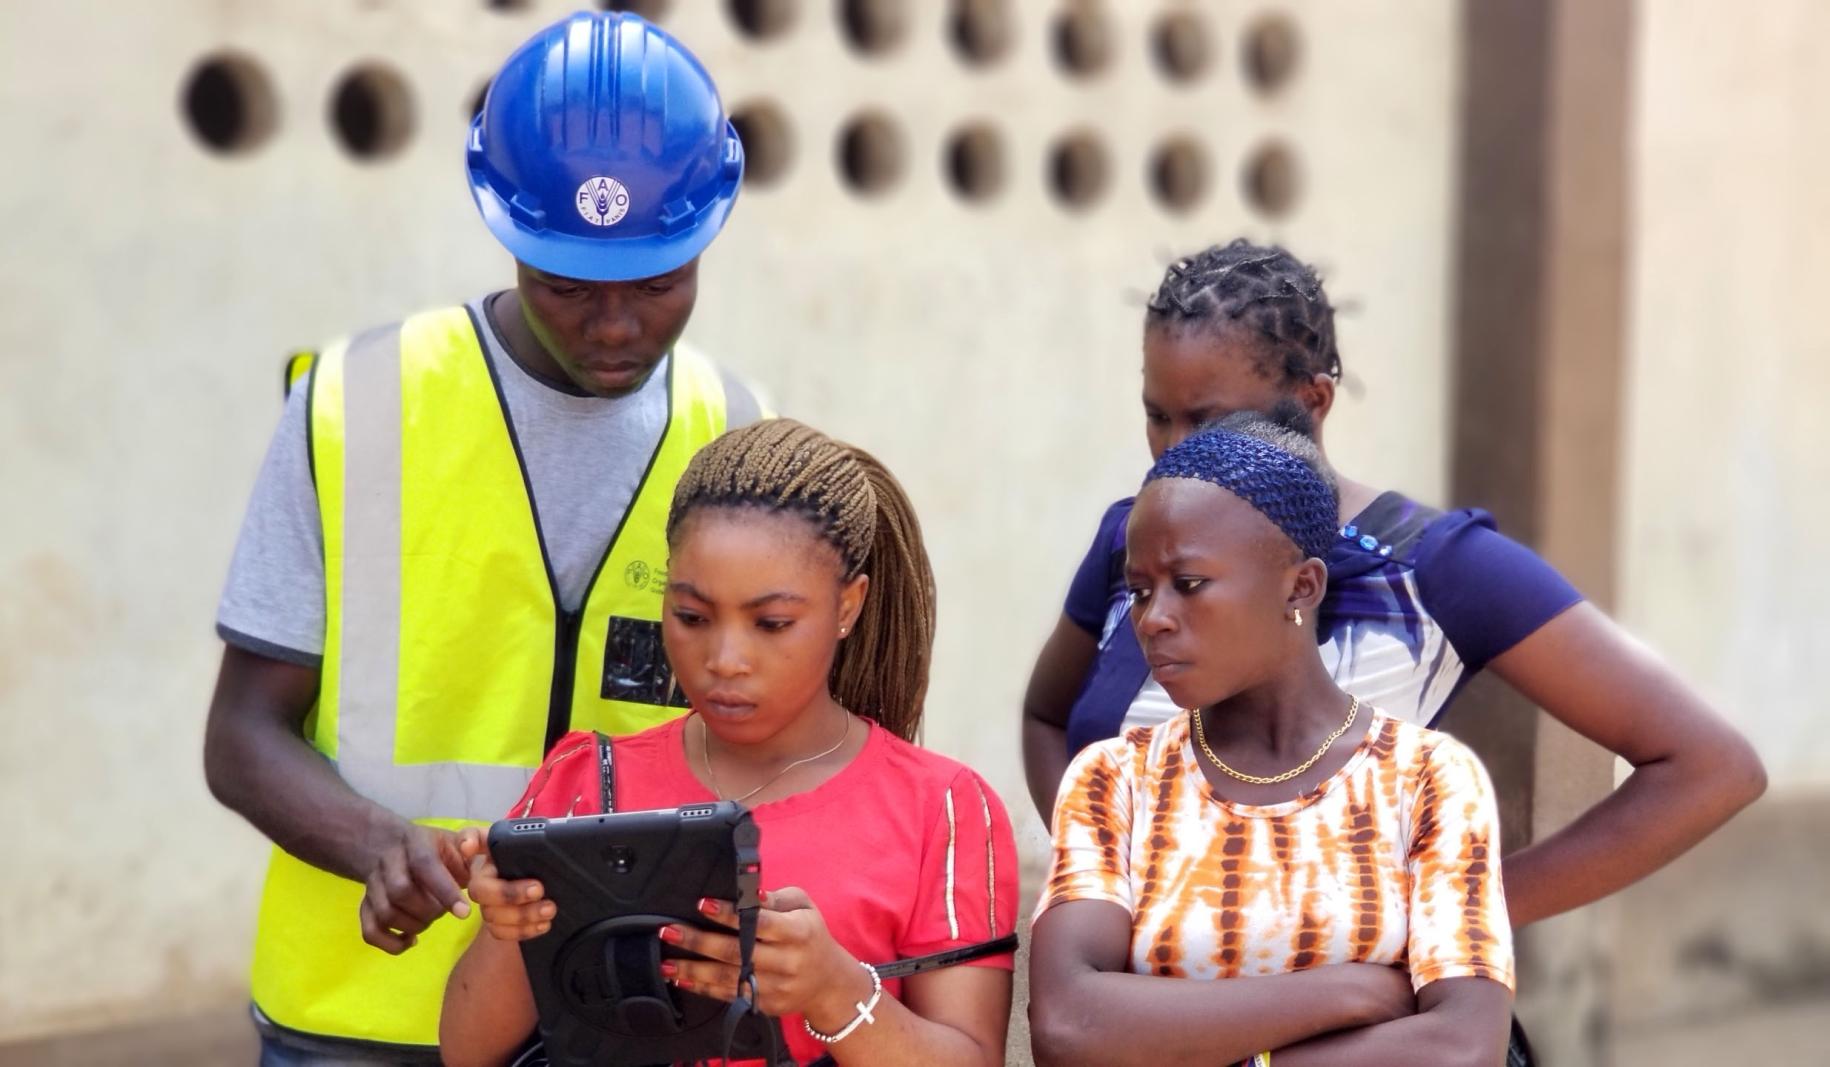 Young women are trained as para-surveyors to map family and village land boundaries. (Please note image was taken prior to COVID-19 social distancing measures were in place.